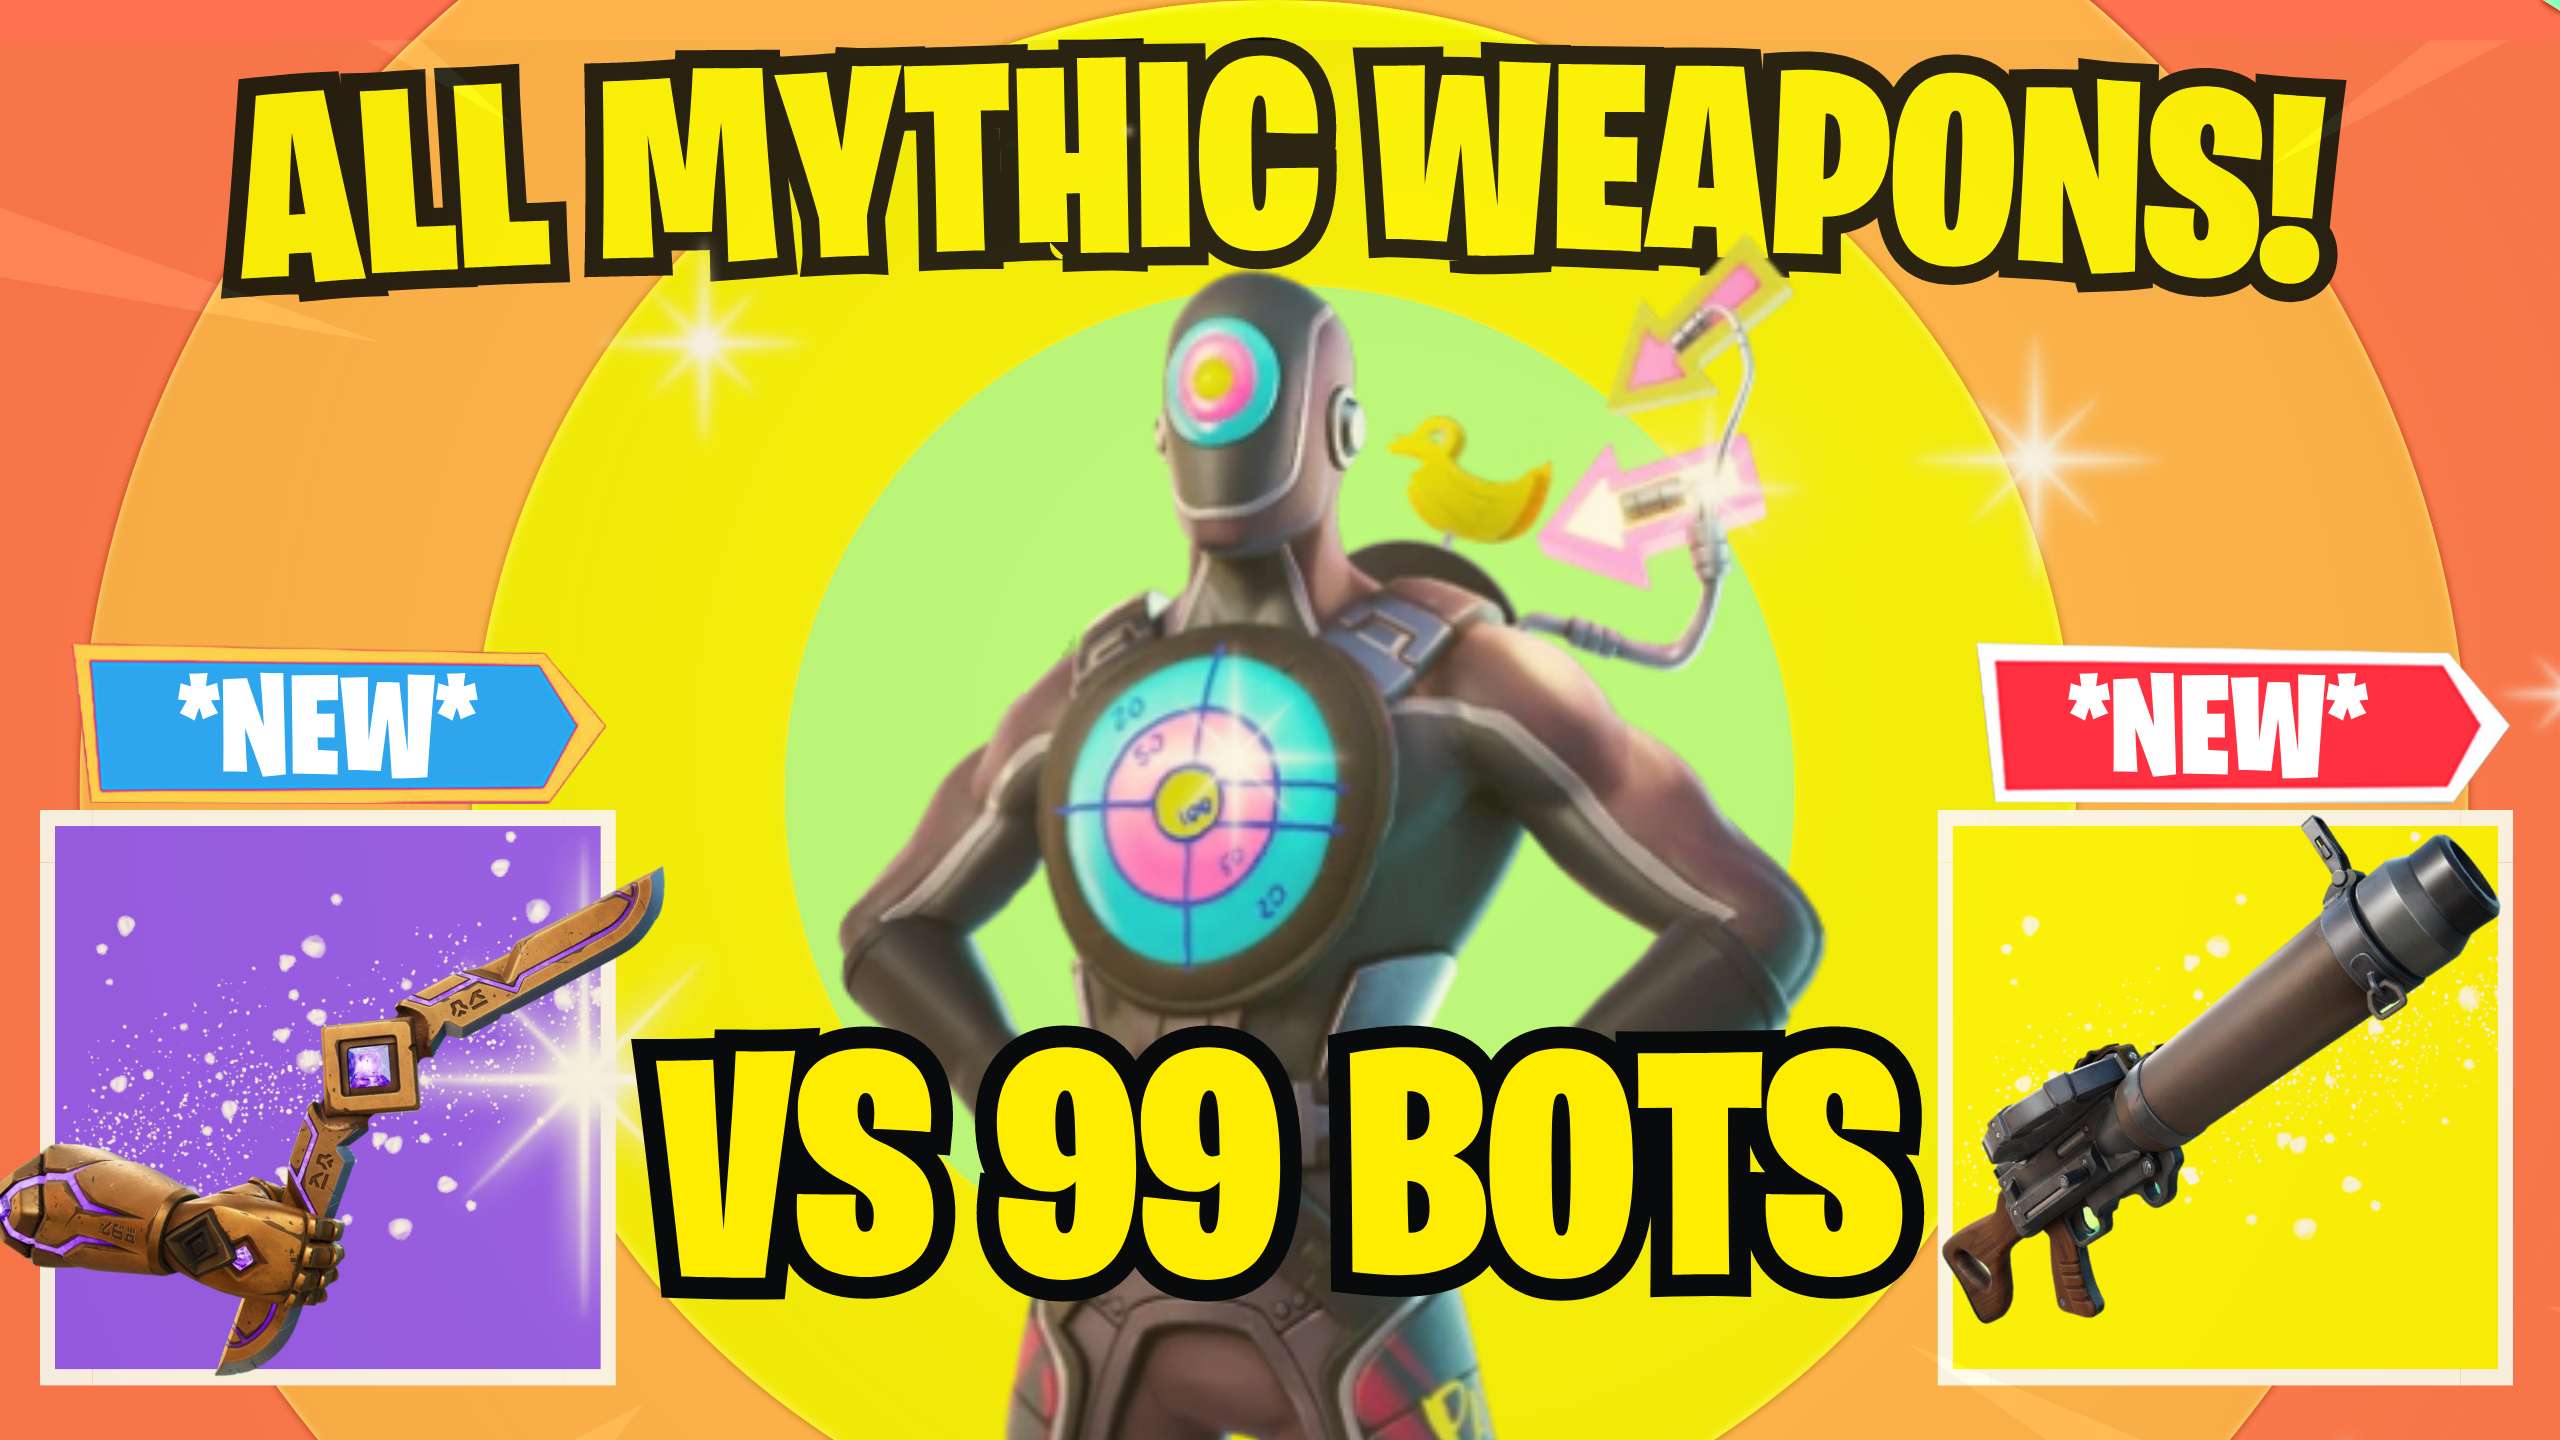 🤖 VS 99 BOTS 🤖  (ALL MYTHIC WEAPONS)